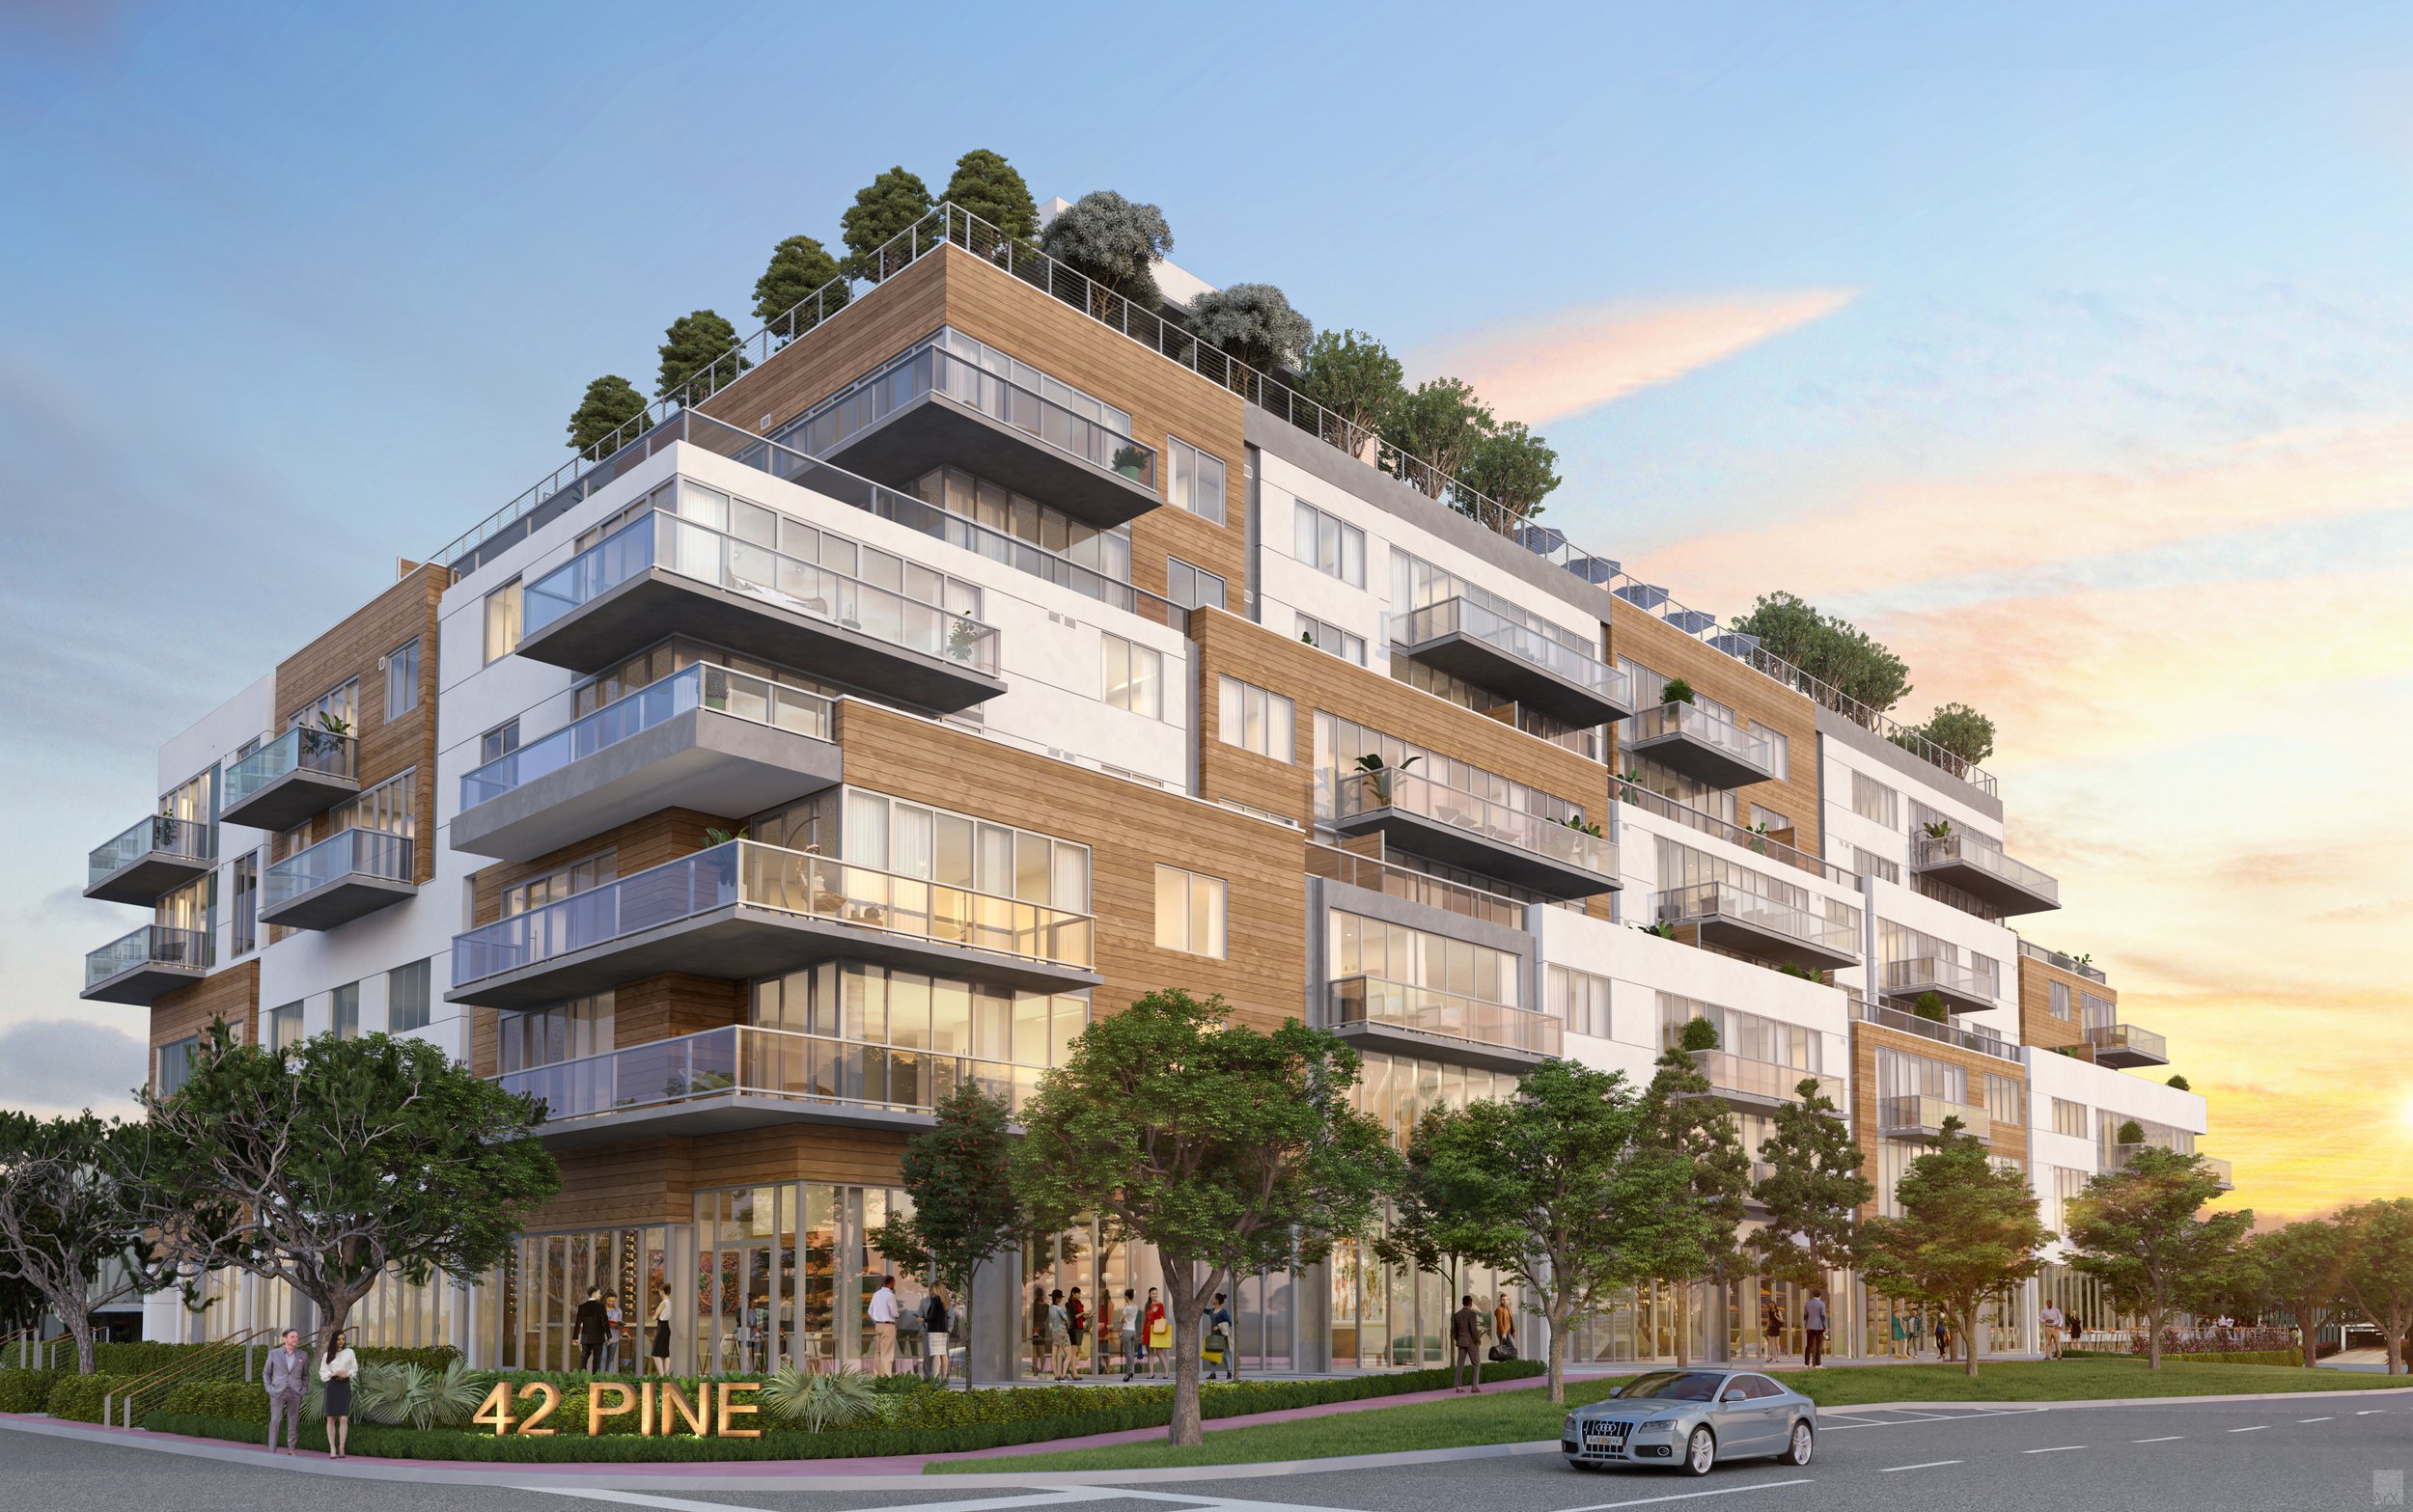 Arquitectonica-Designed Boutique Condo 42 Pine Launches Sales On Miami Beach's Pine Tree Drive And 41st Street5.jpg